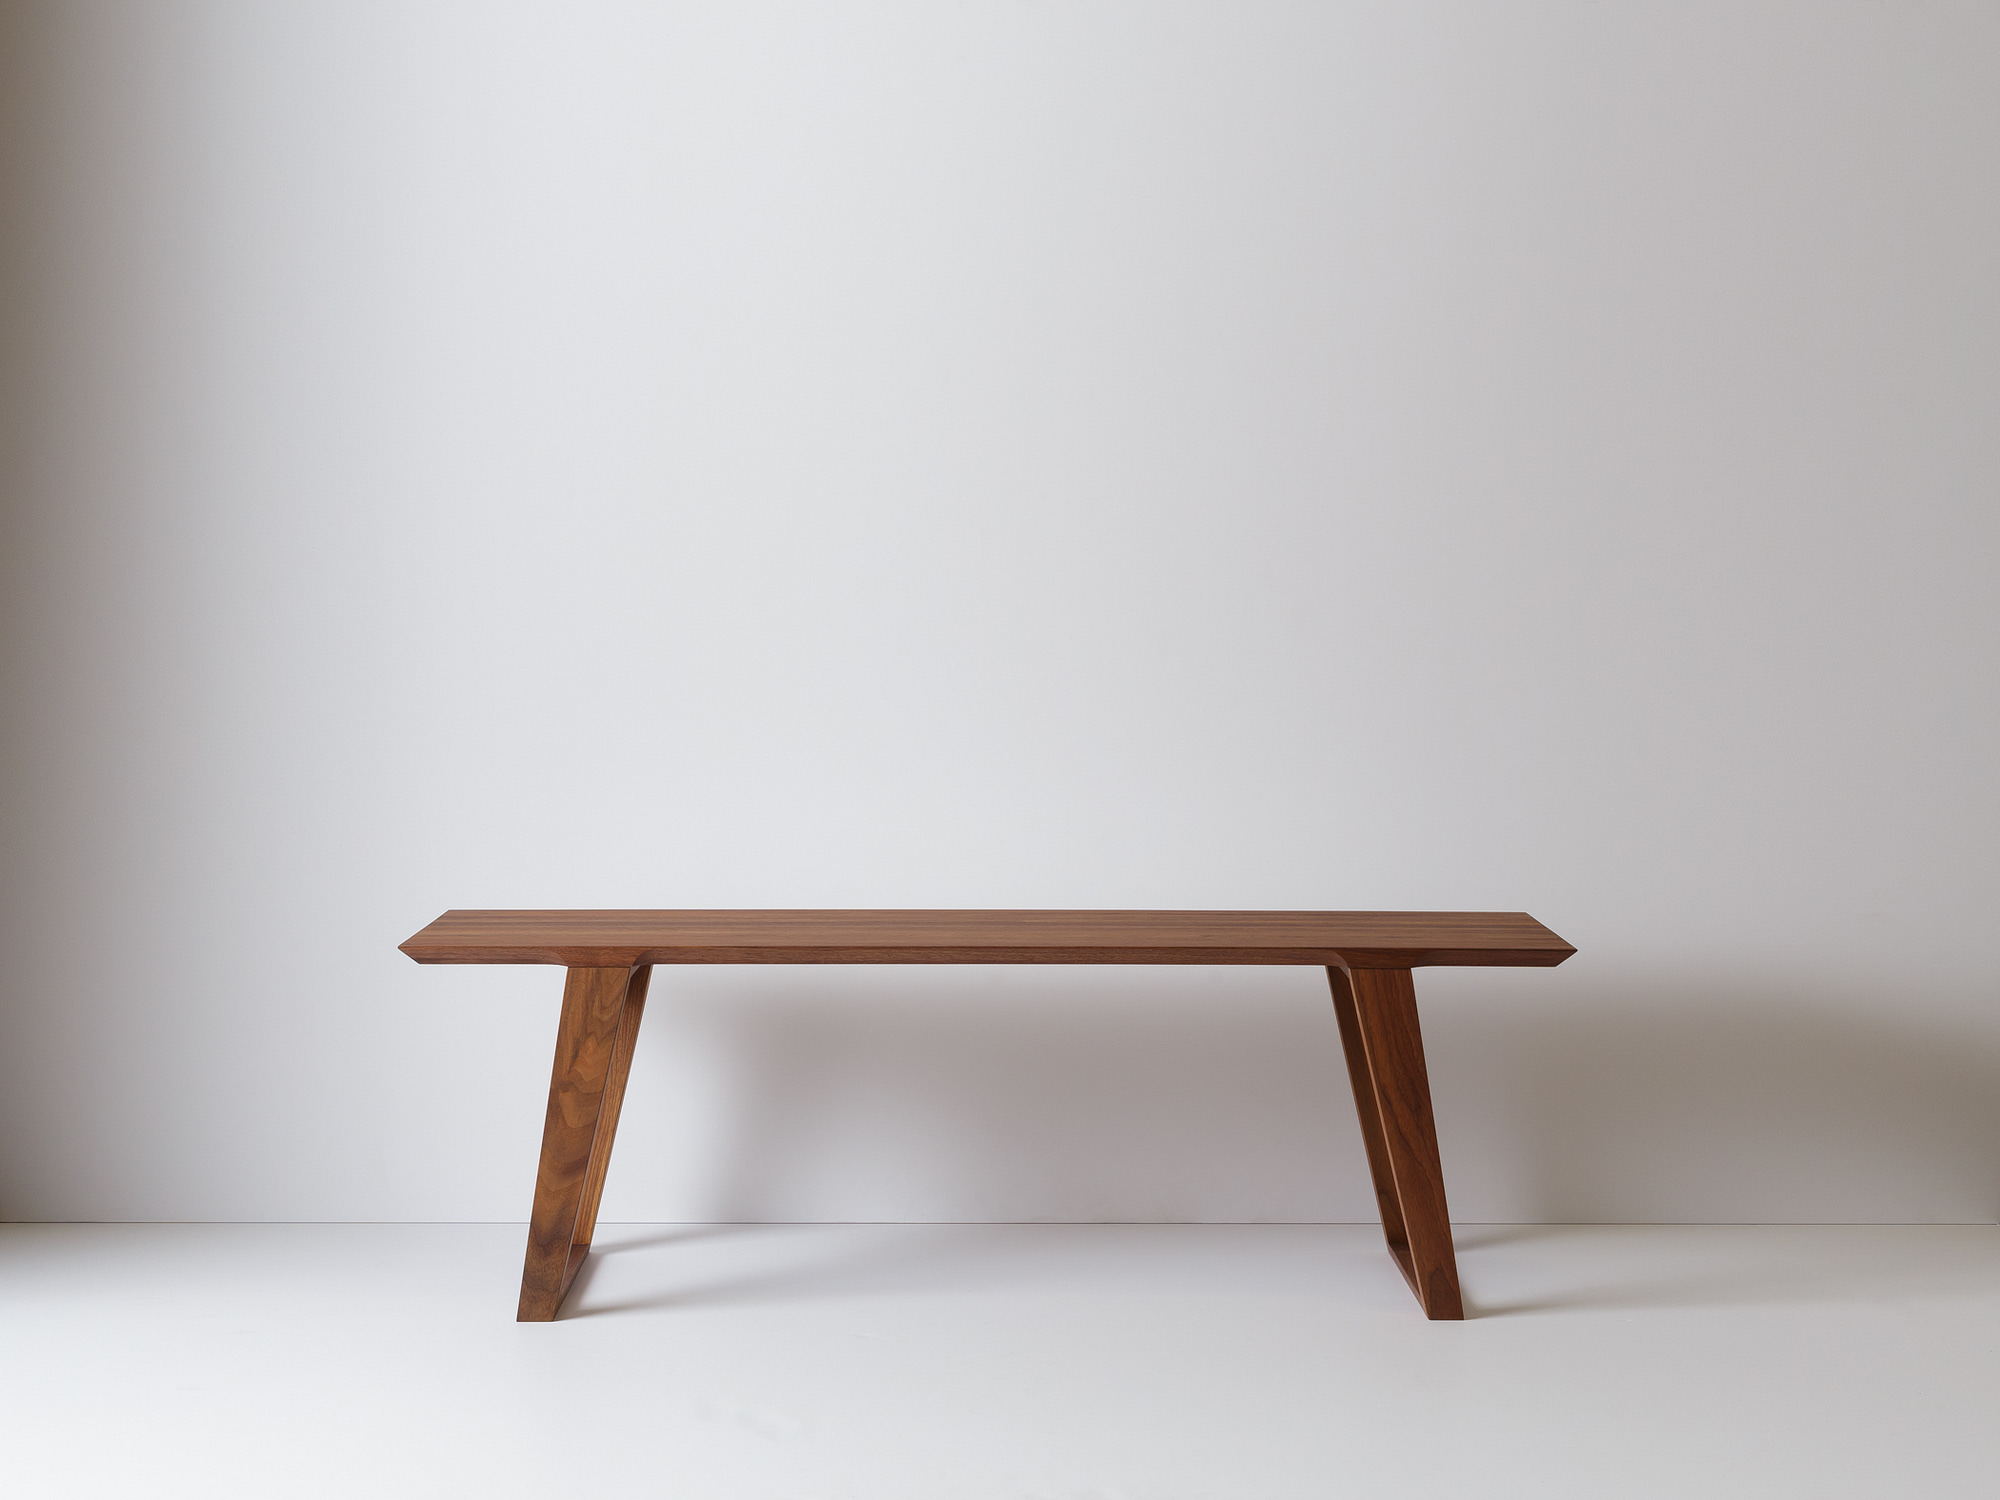 Modern Contemporary Isometric Bench Coffee Table in solid walnut